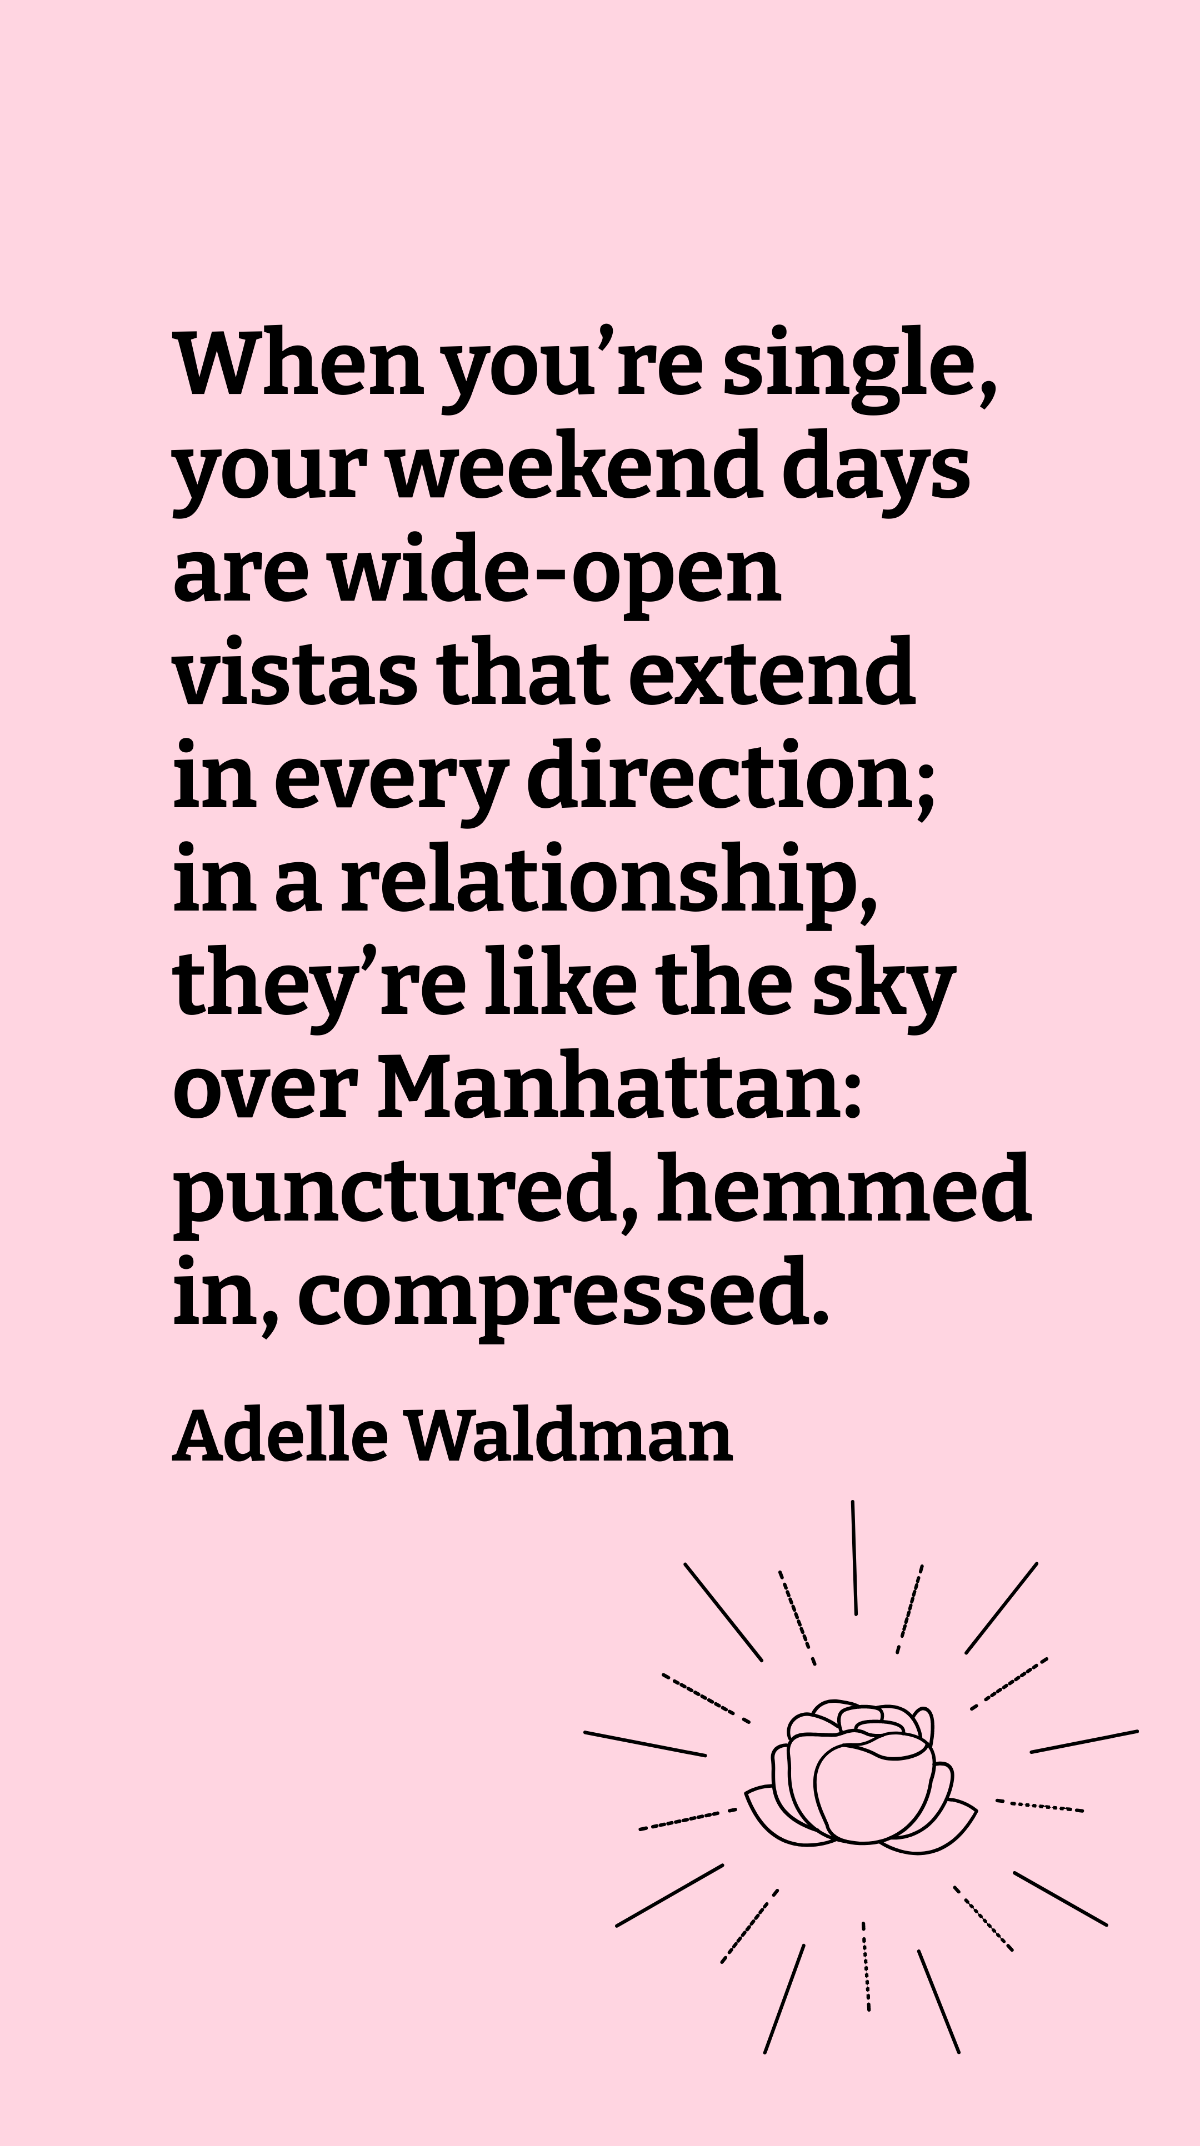 Free Adelle Waldman - When you’re single, your weekend days are wide-open vistas that extend in every direction; in a relationship, they’re like the sky over Manhattan: punctured, hemmed in, compressed.  T